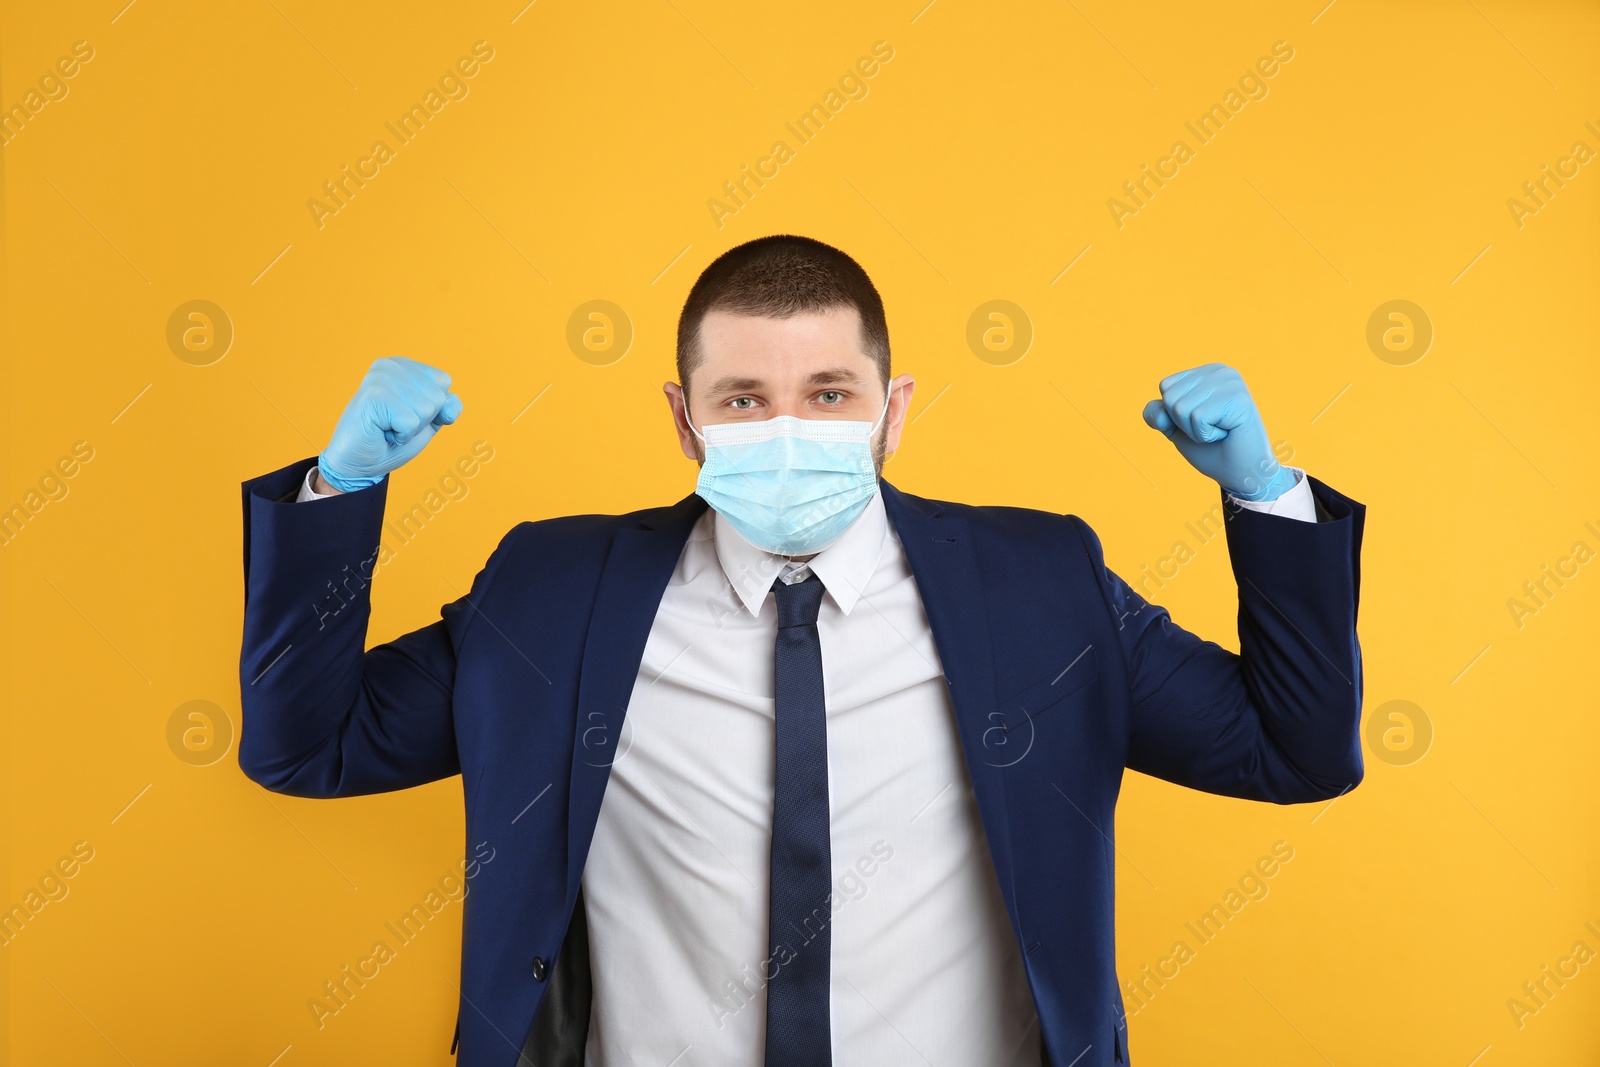 Photo of Businessman with protective mask and gloves showing muscles on yellow background. Strong immunity concept